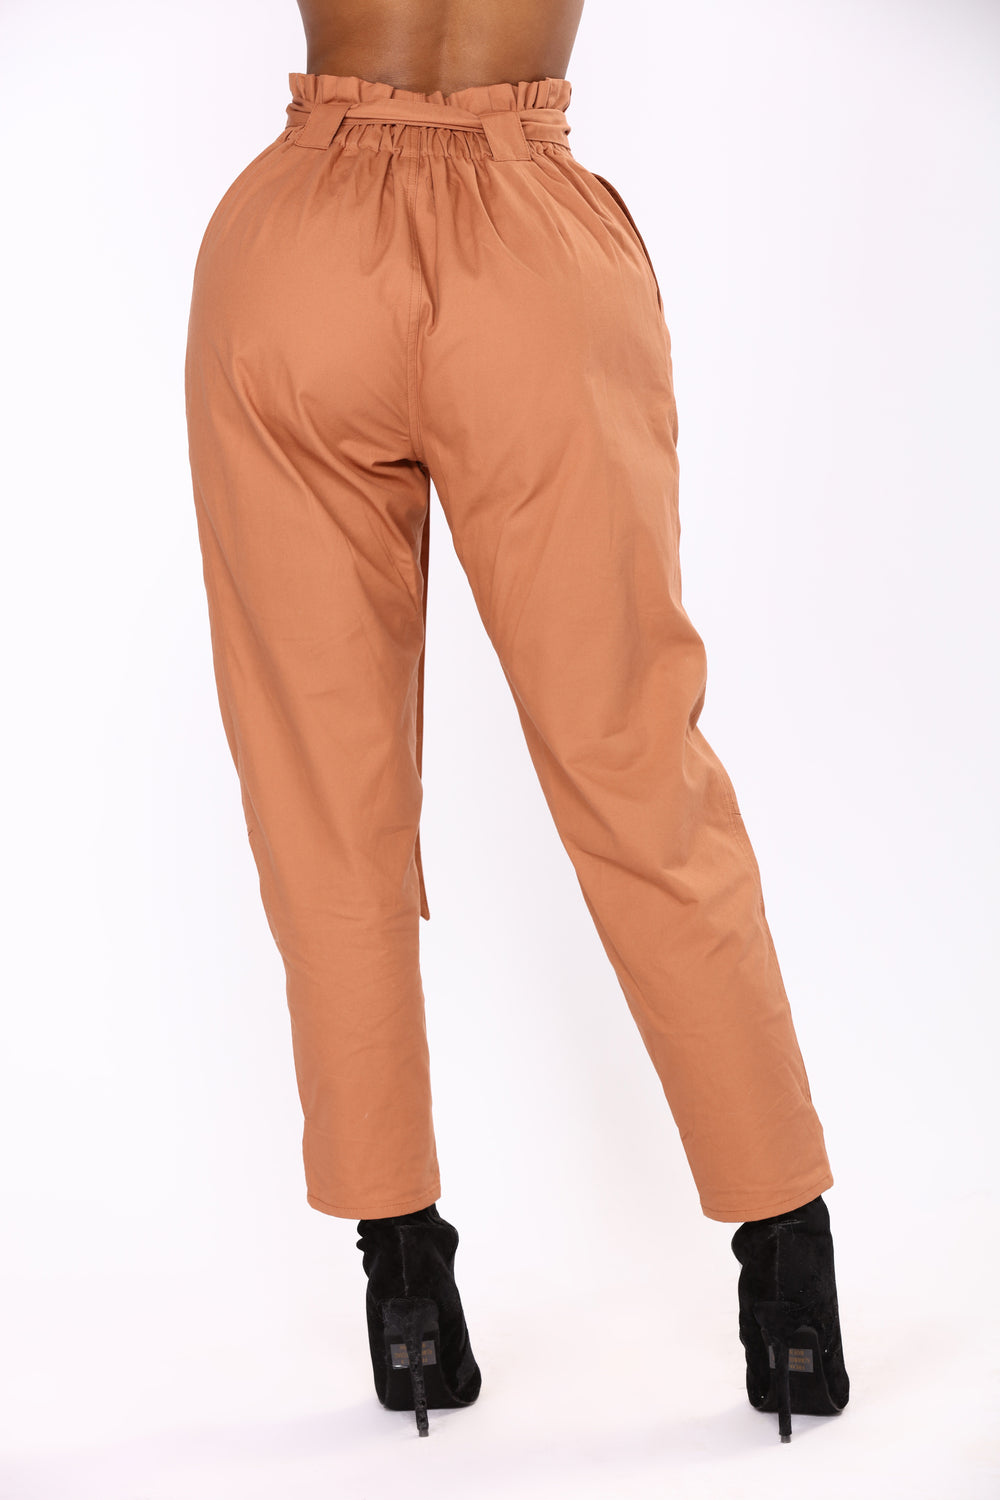 Going On An Adventure Cargo Pants - Camel